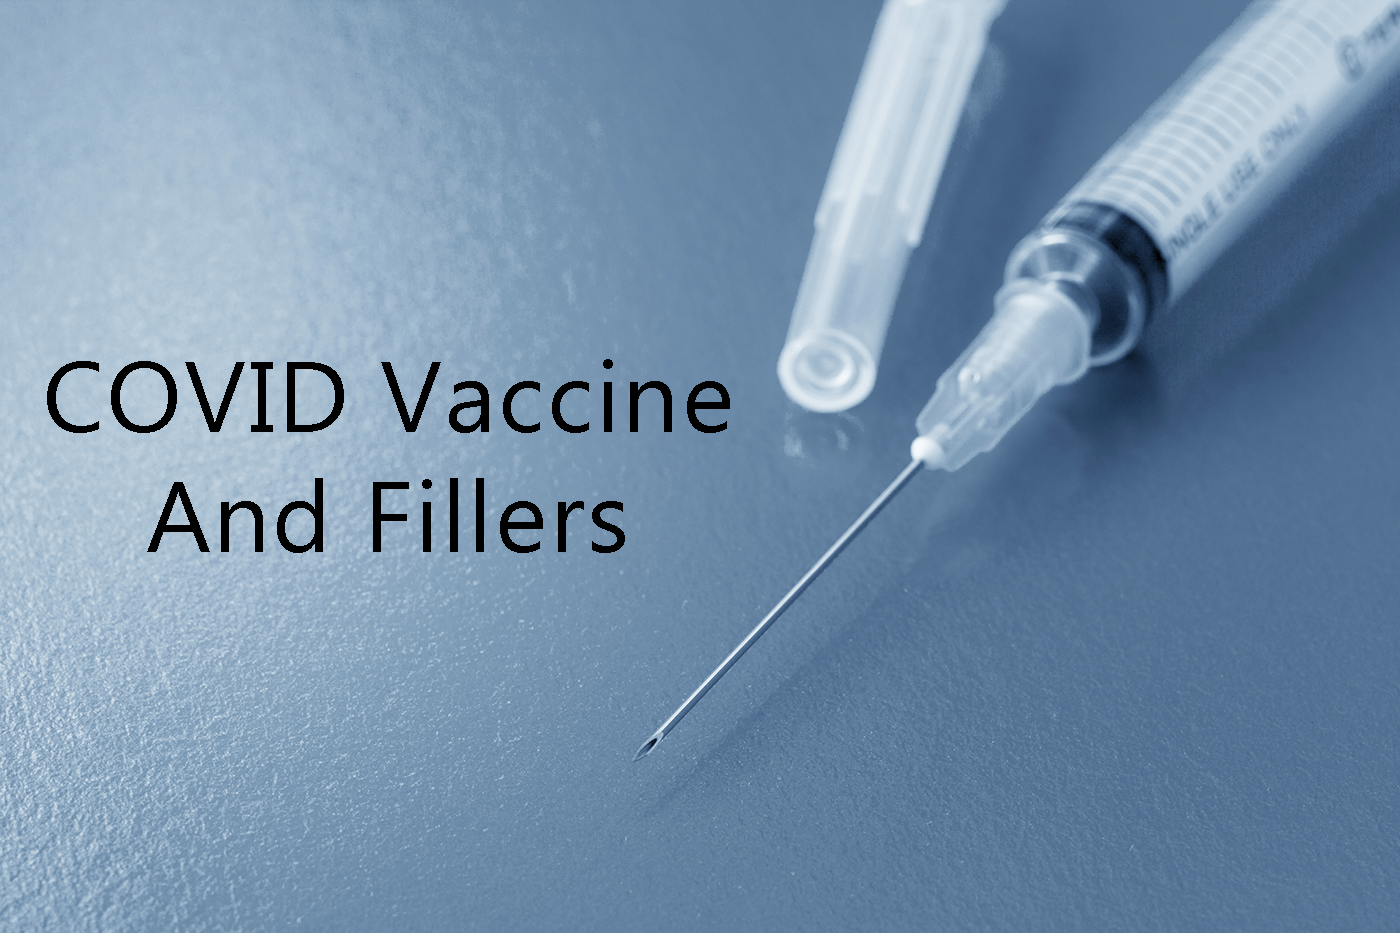 COVID: The Vaccine and Fillers